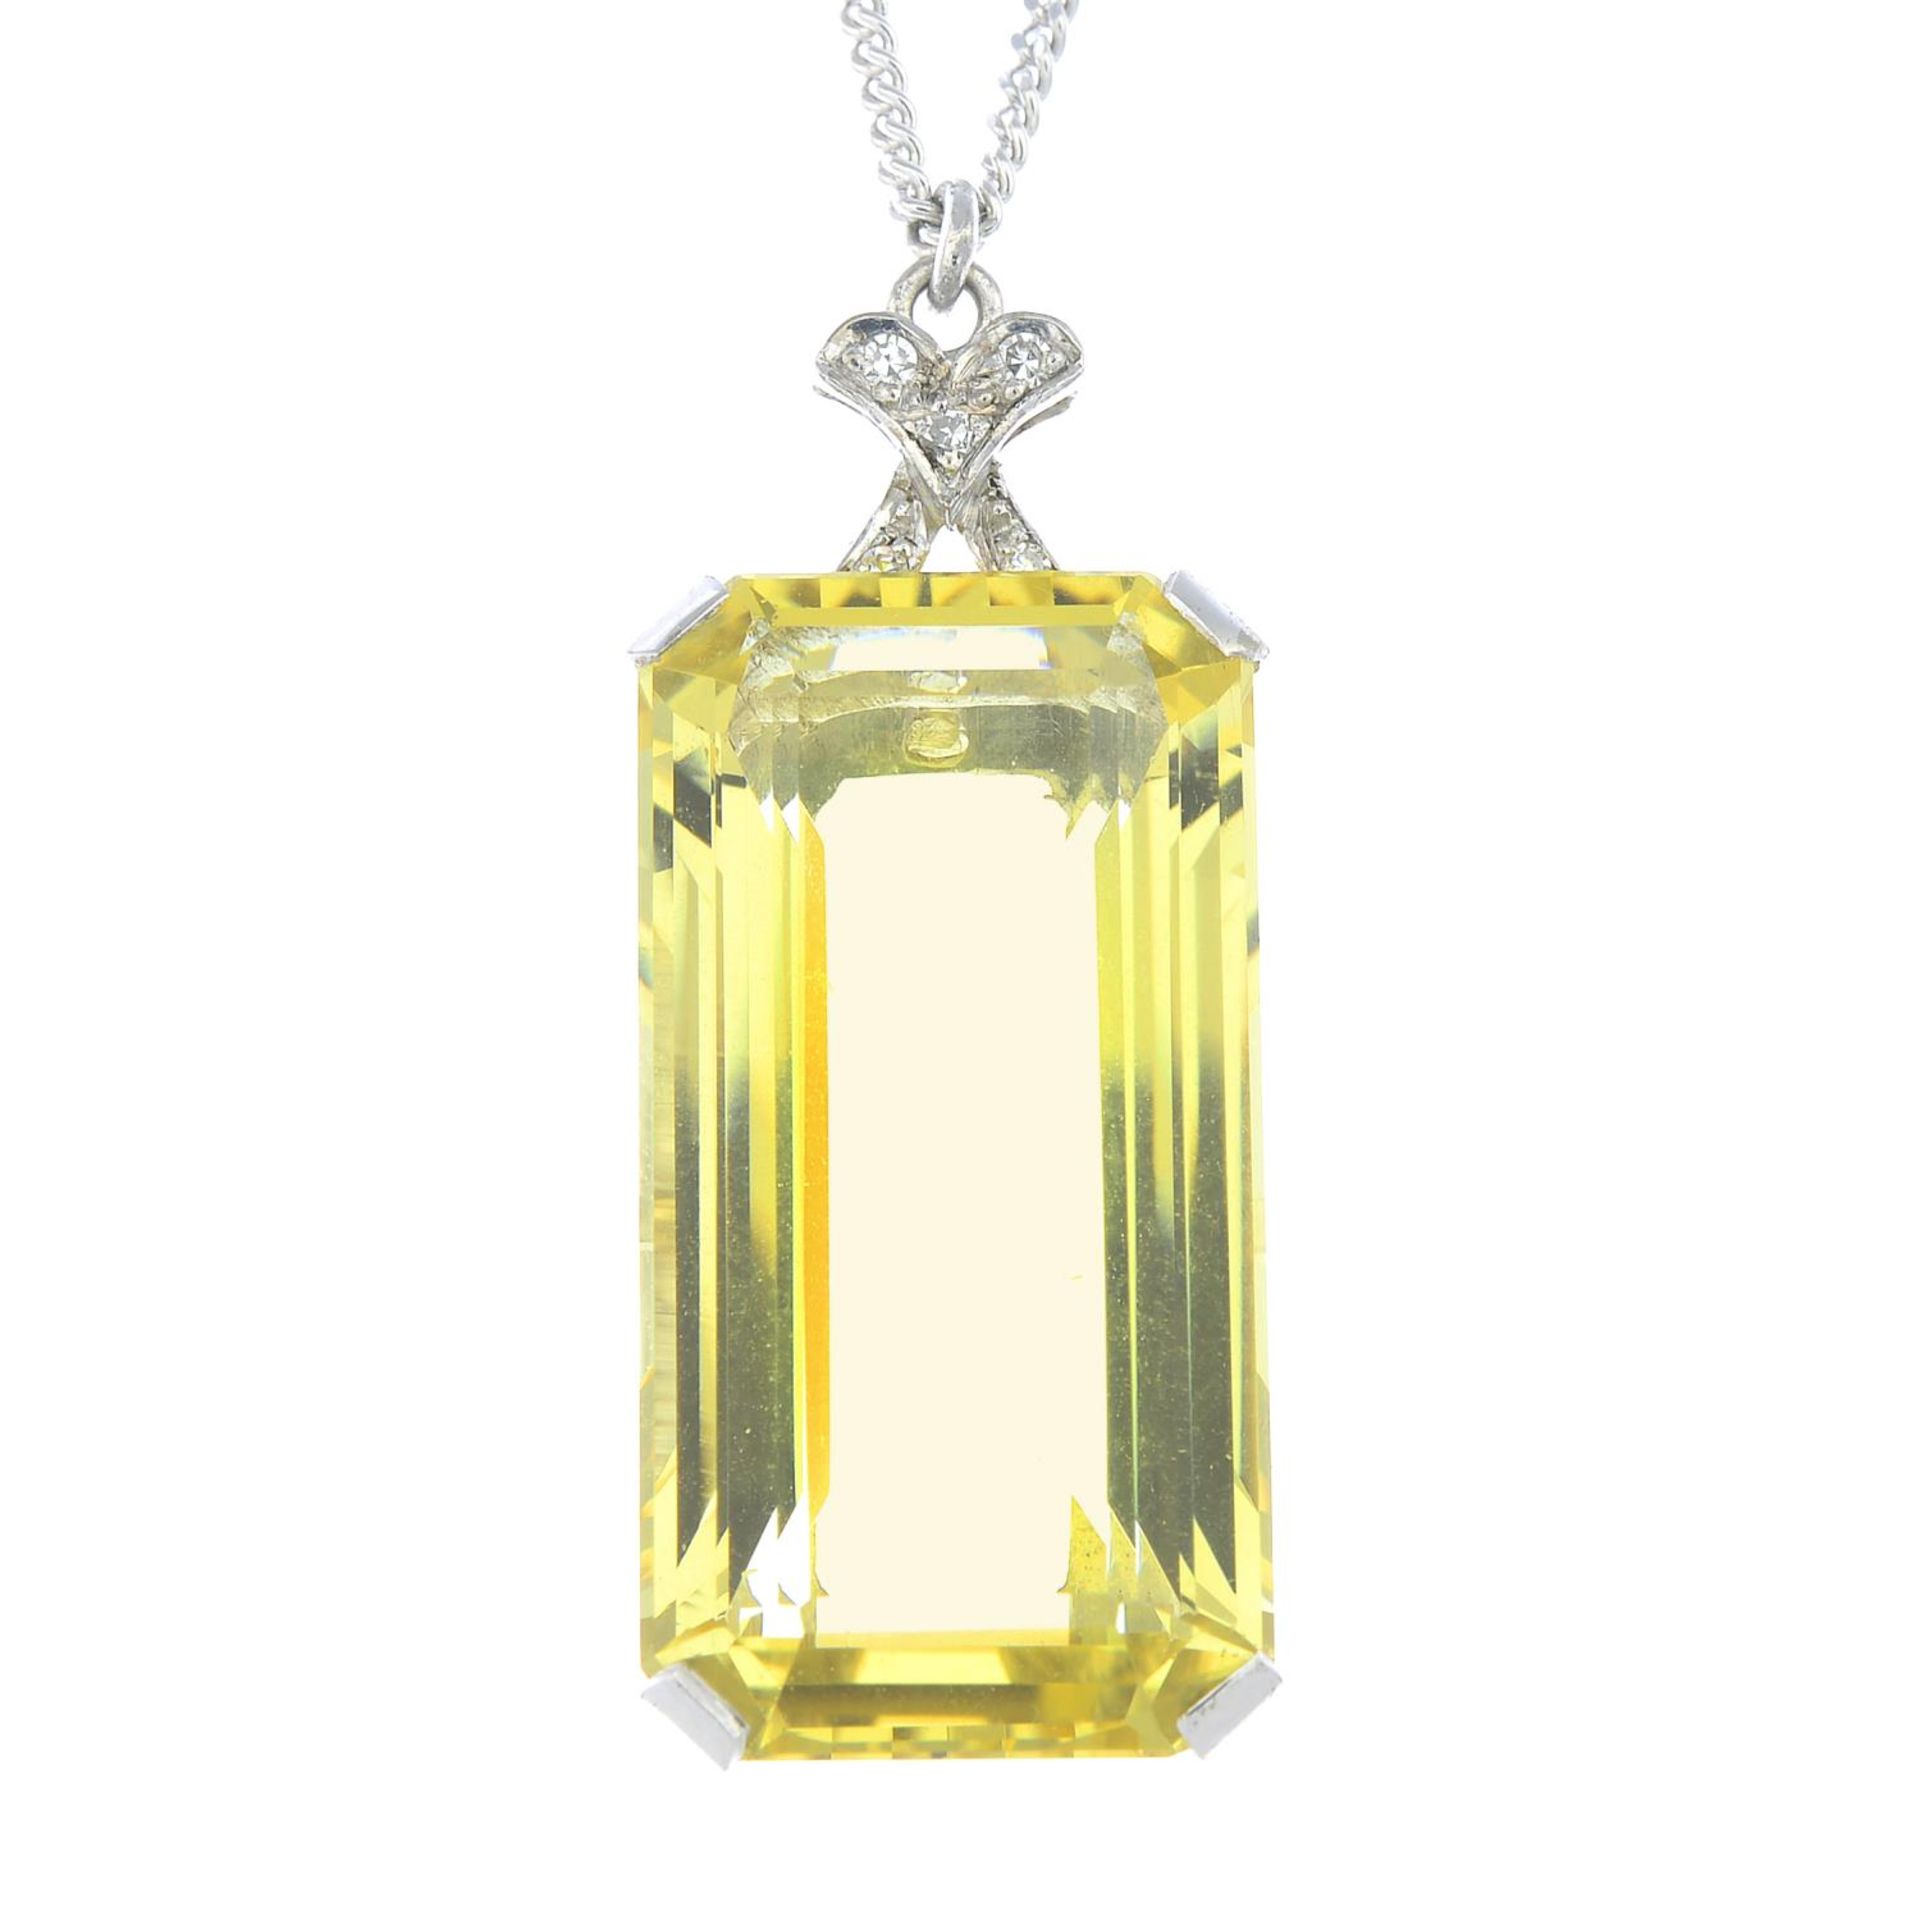 A heliodor and diamond pendant, on chain. - Image 4 of 5